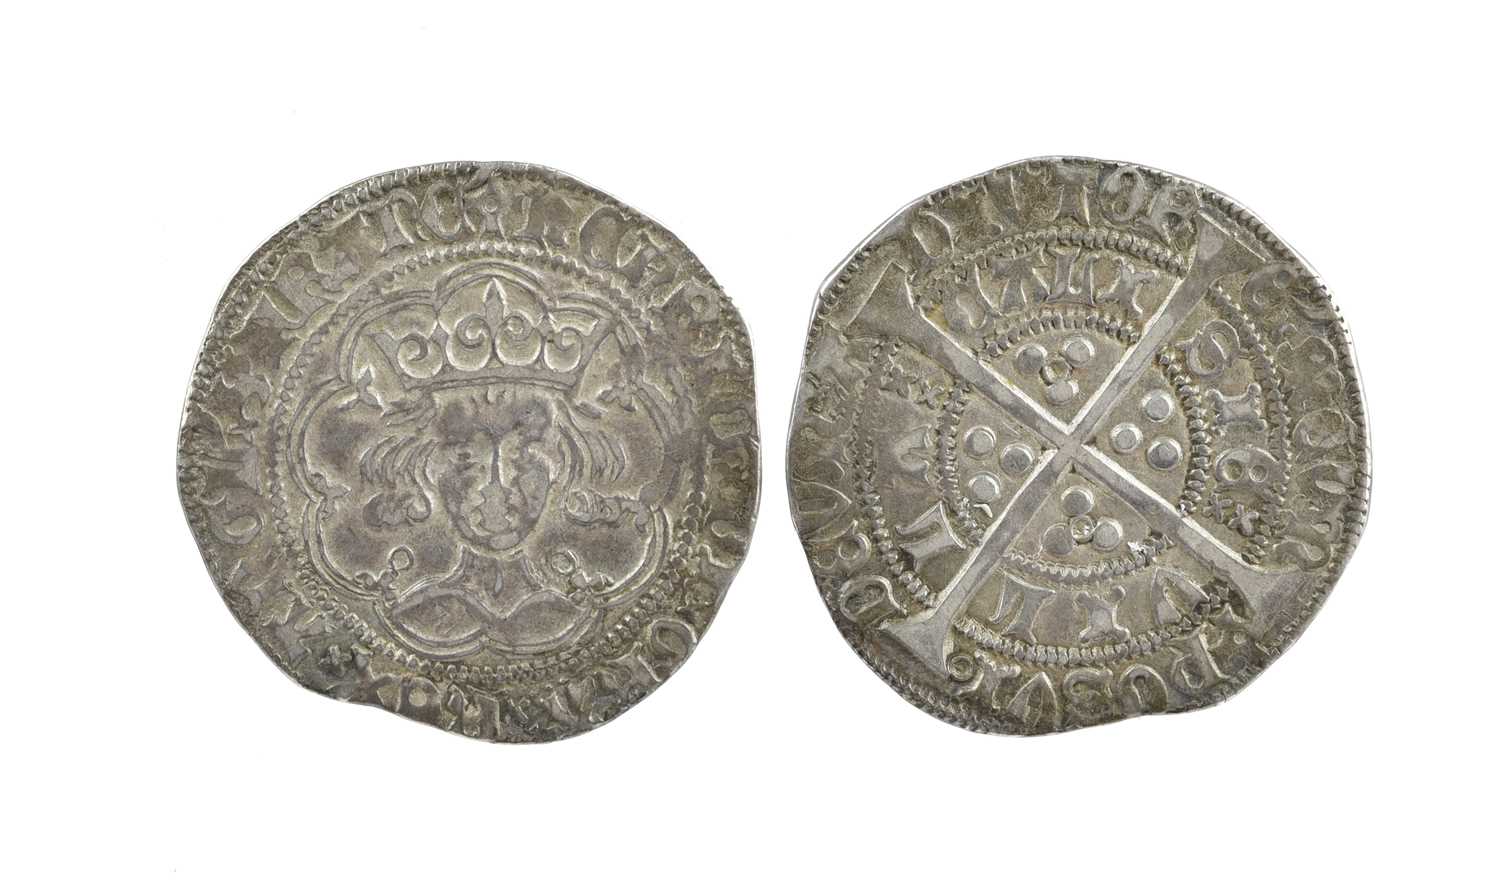 Henry VI, first reign (1422-61), silver groat, annulet issue, Calais mint (S 1836), good very fine.